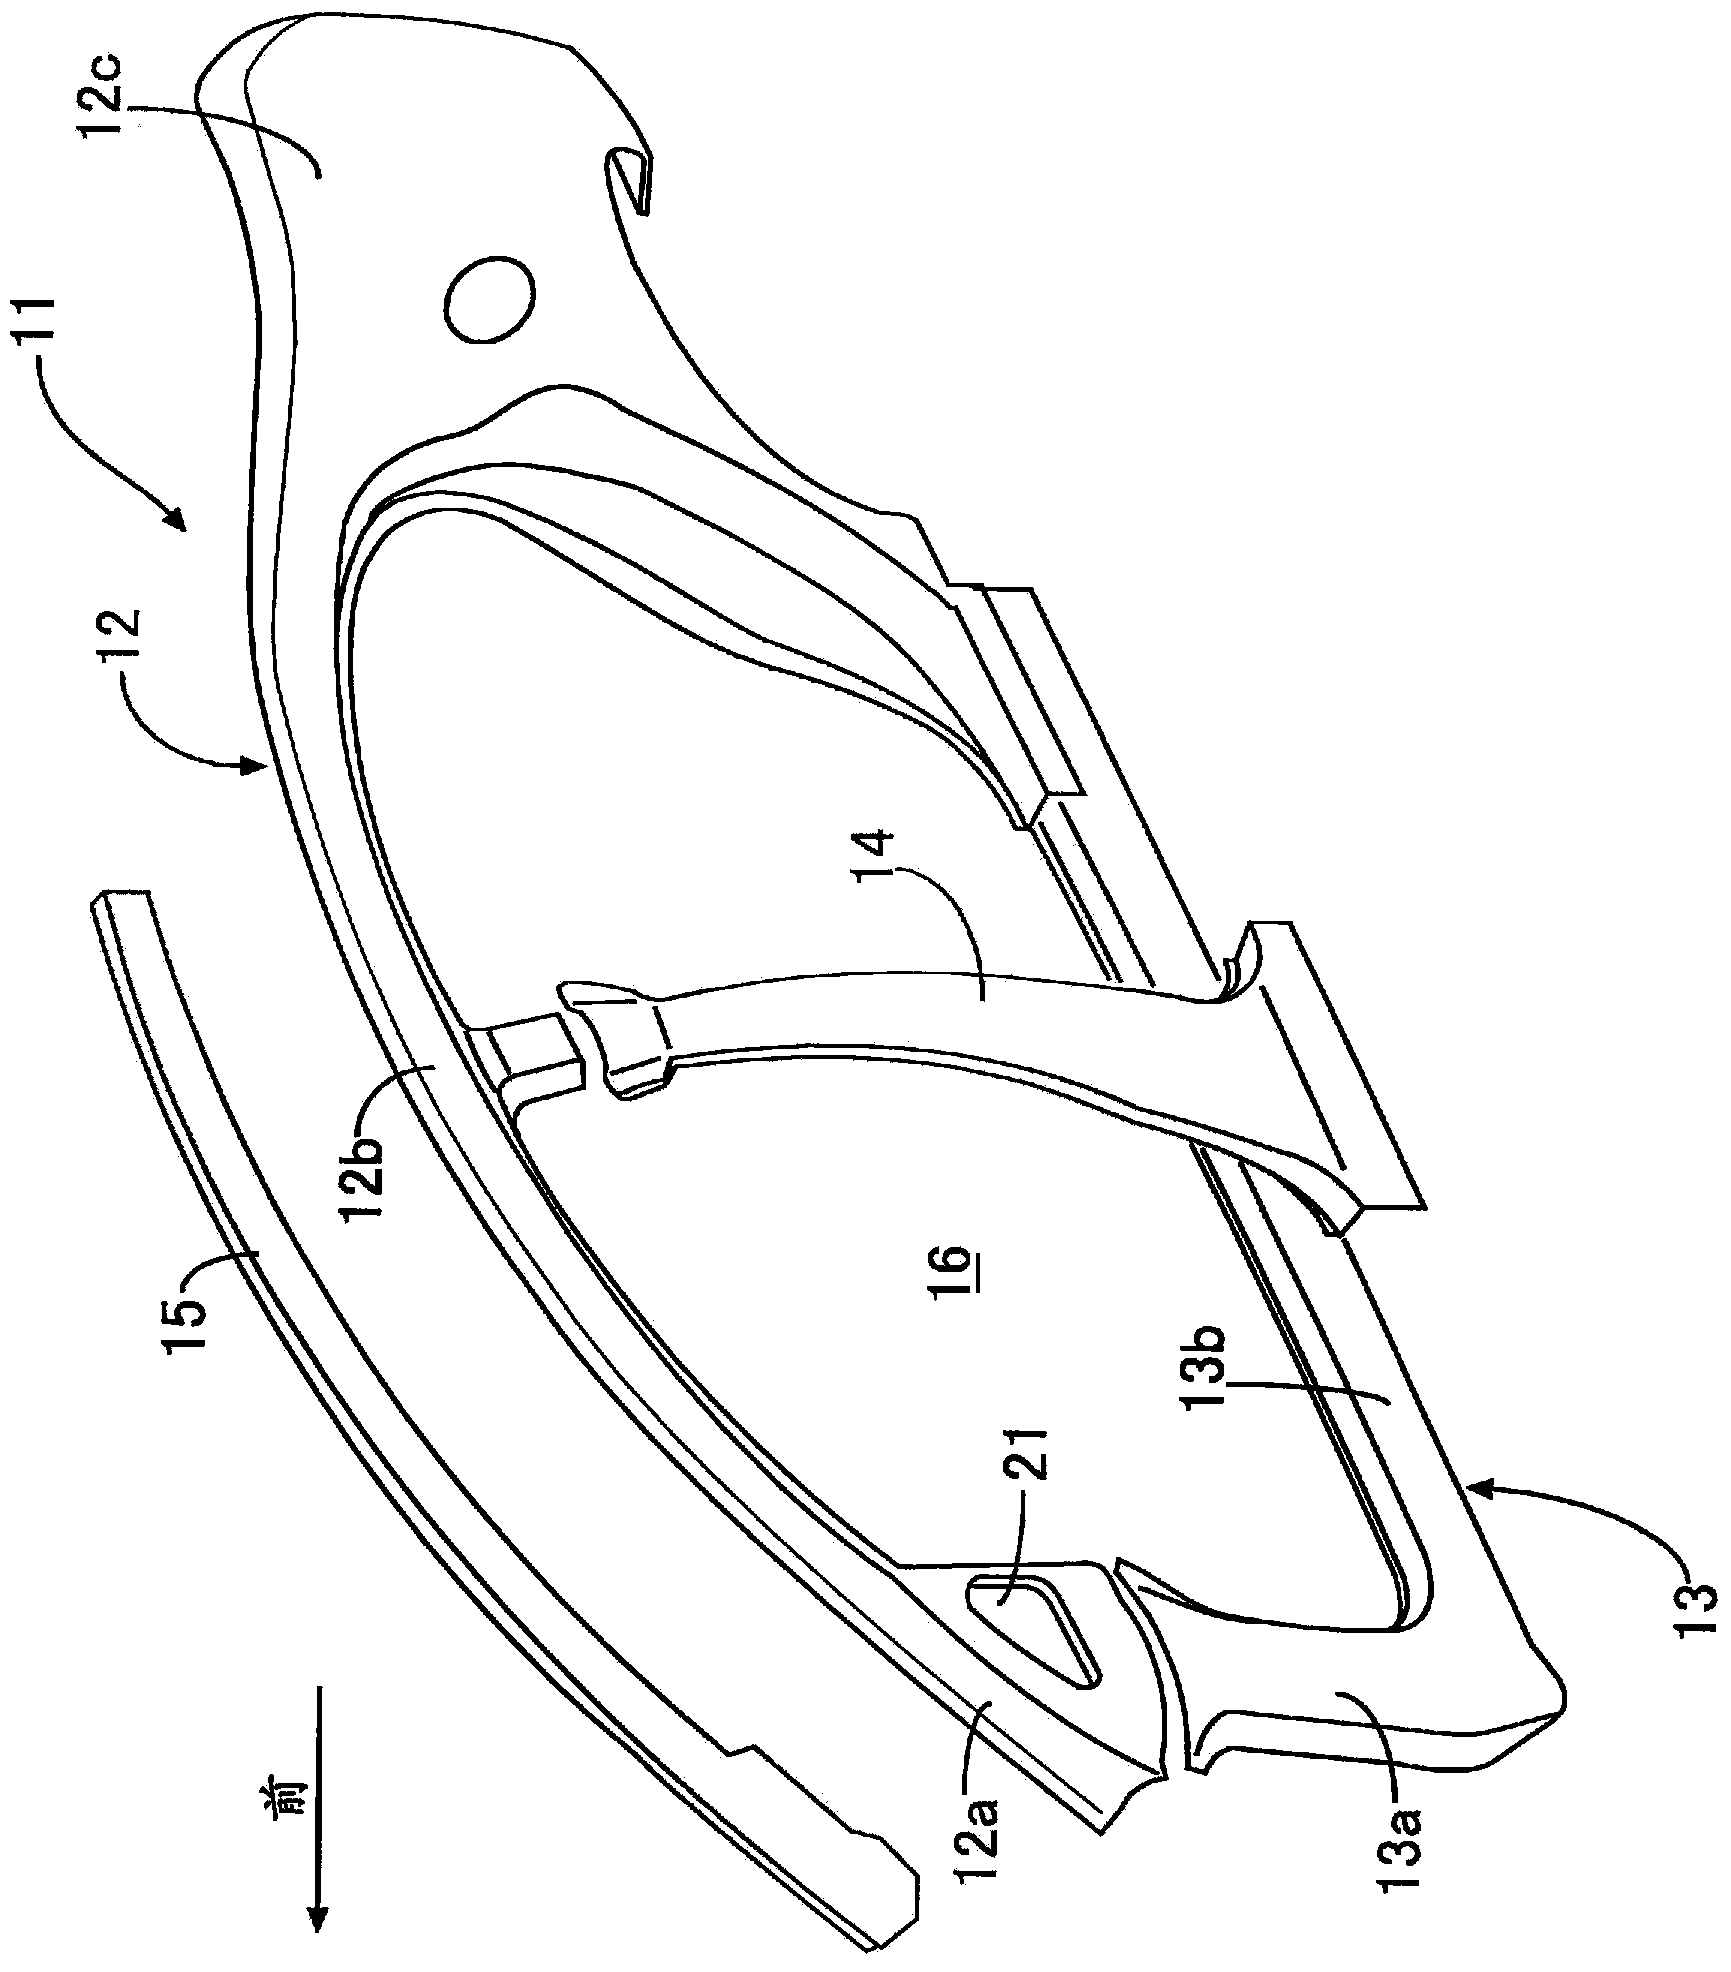 Welded structure for vehicle body panel